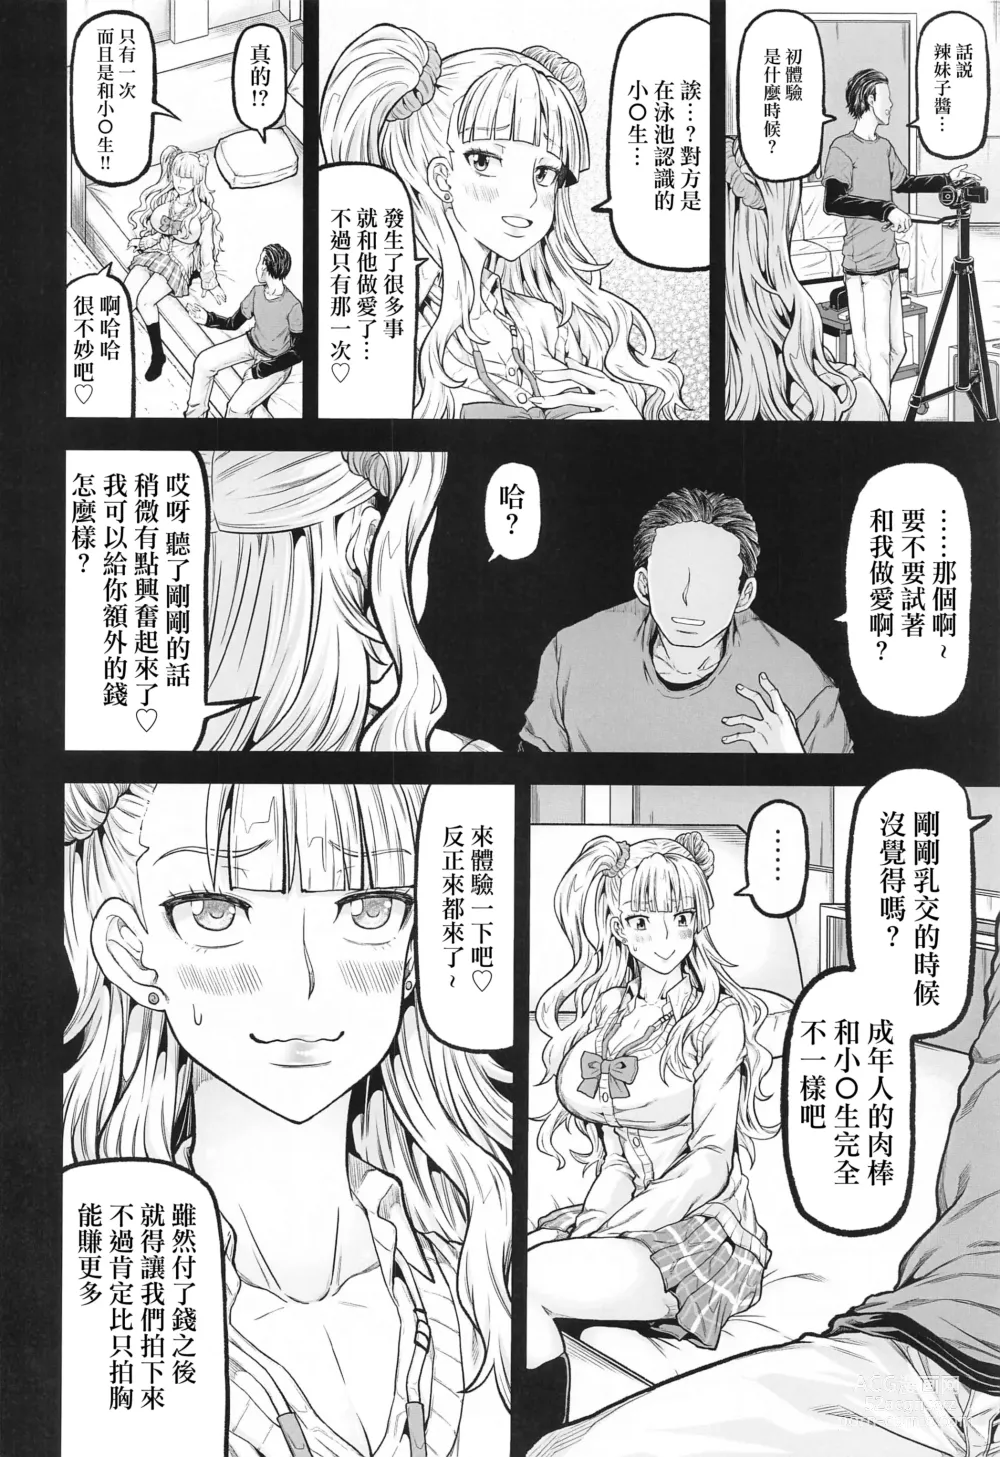 Page 7 of doujinshi gals works